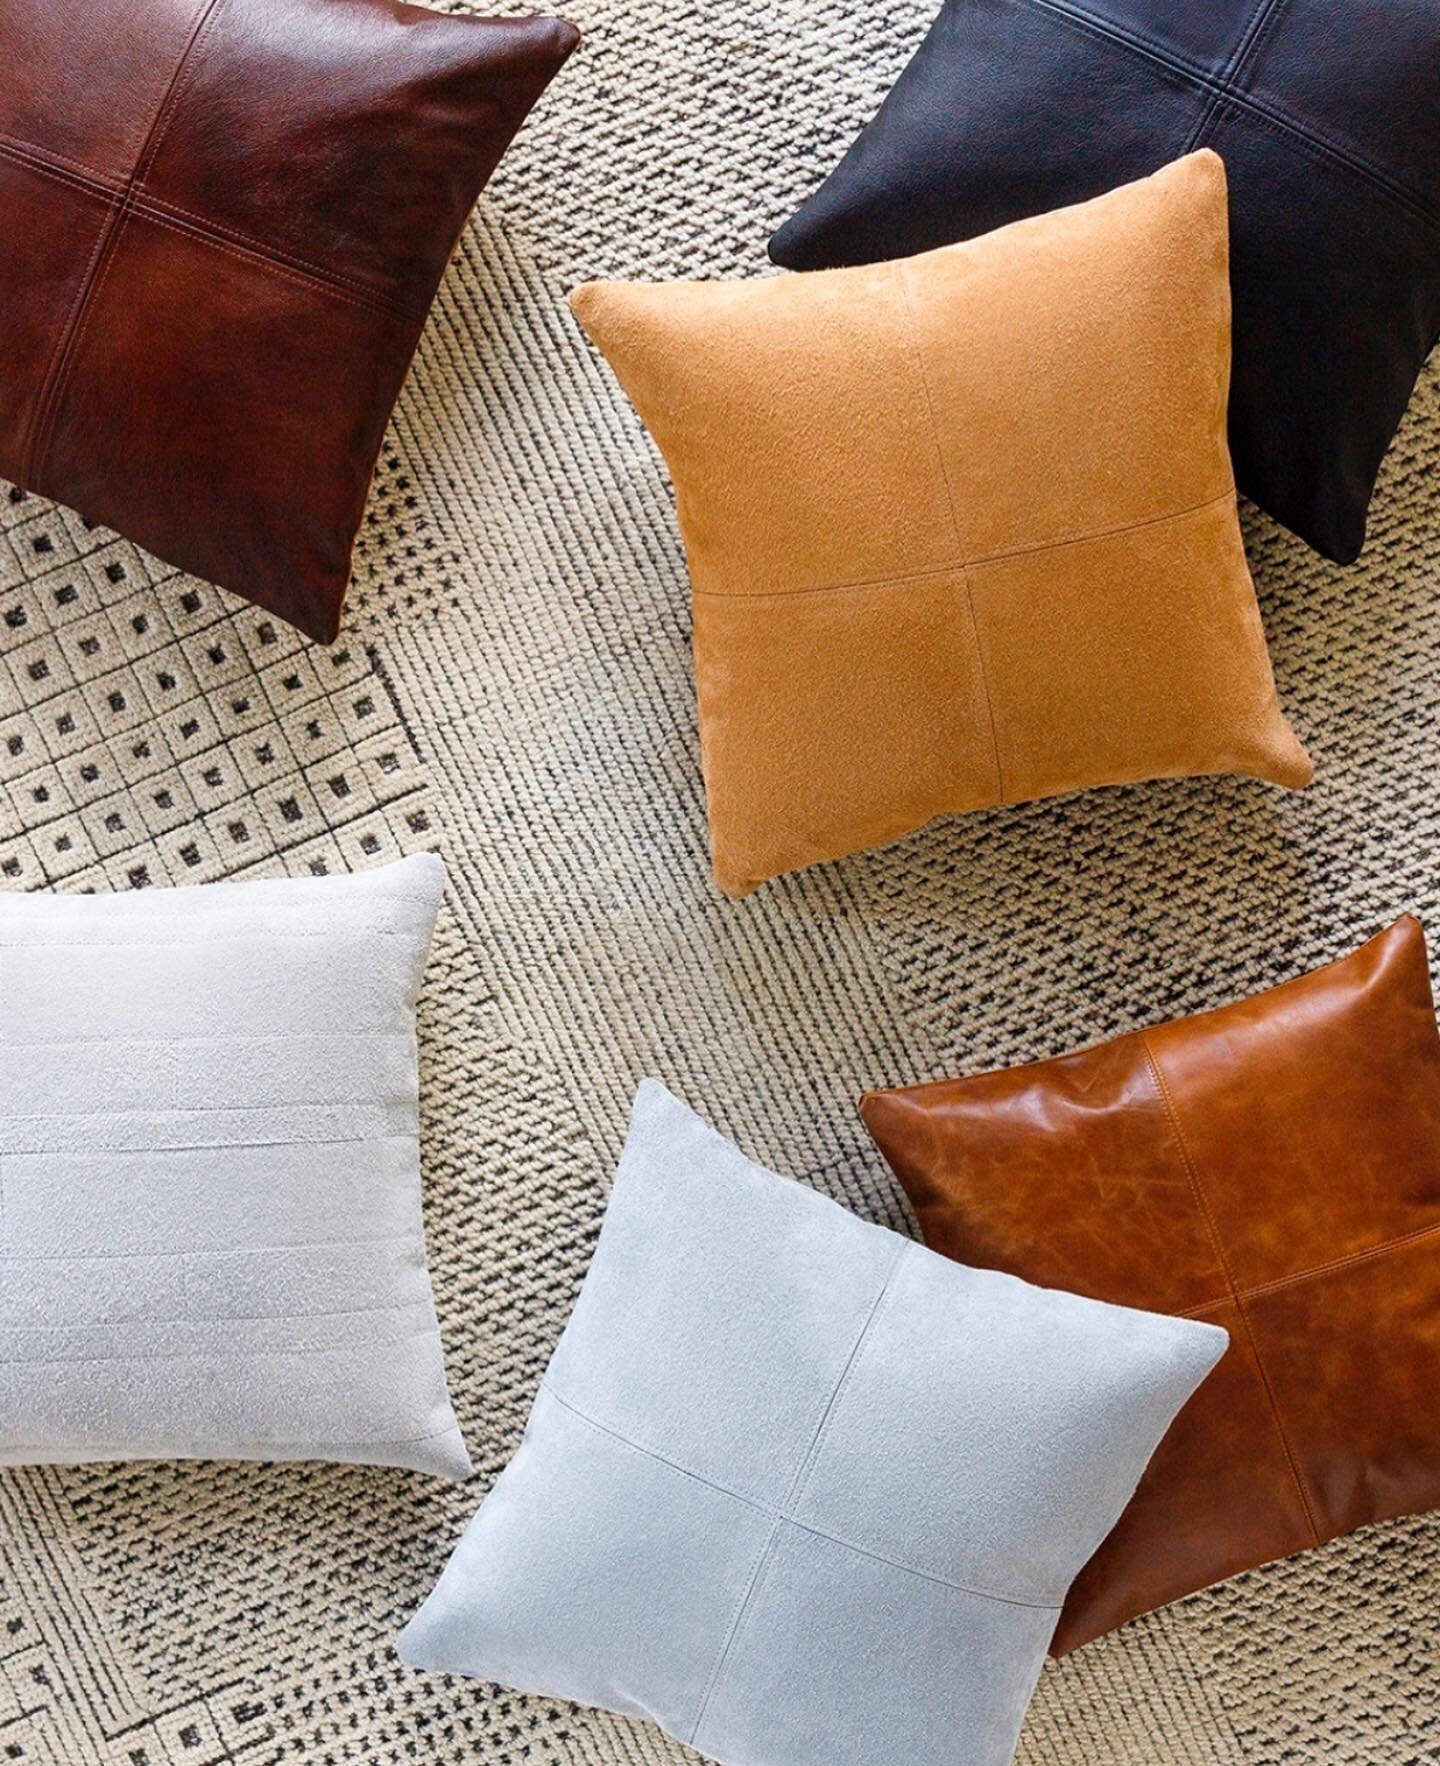 What dreams are made of. These pillows by @suryasocial have us dreaming of style! 

#denver #colorado #decor #decorinspo #decorinspiration #furnituredesign #furnituredesigner #showroom #design #designshowroom #denverdesign #denverdesigndistrict #mode